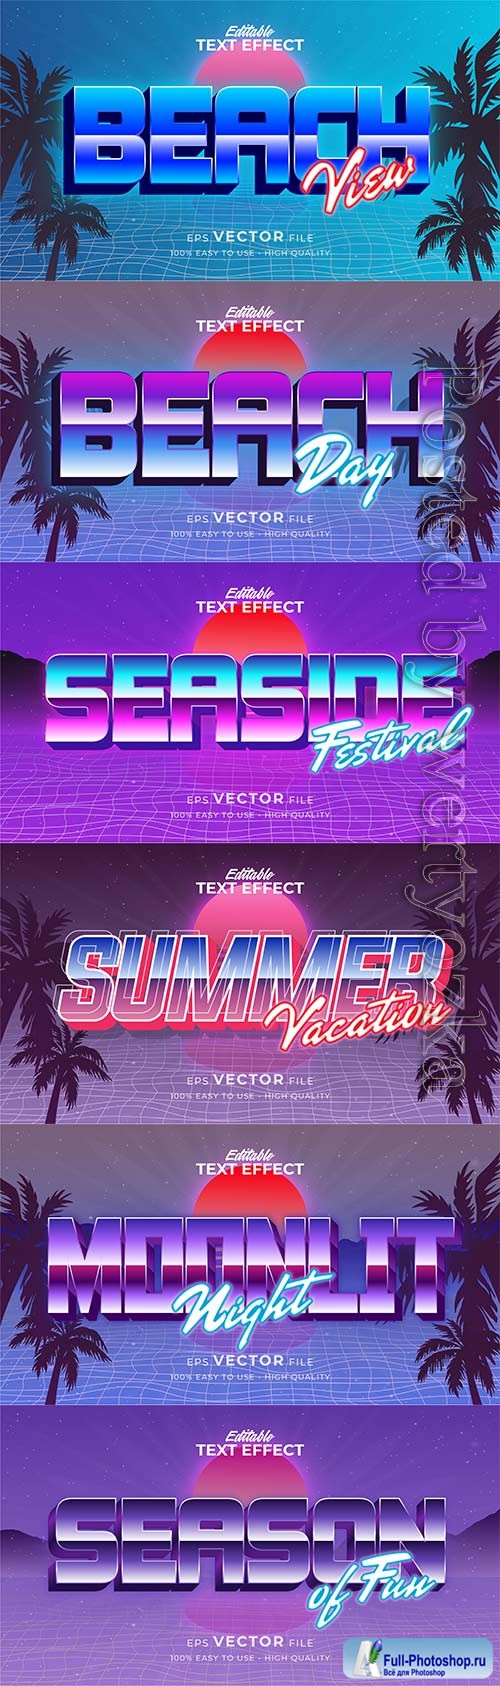 Text style effect, retro summer text in grunge style vol 6